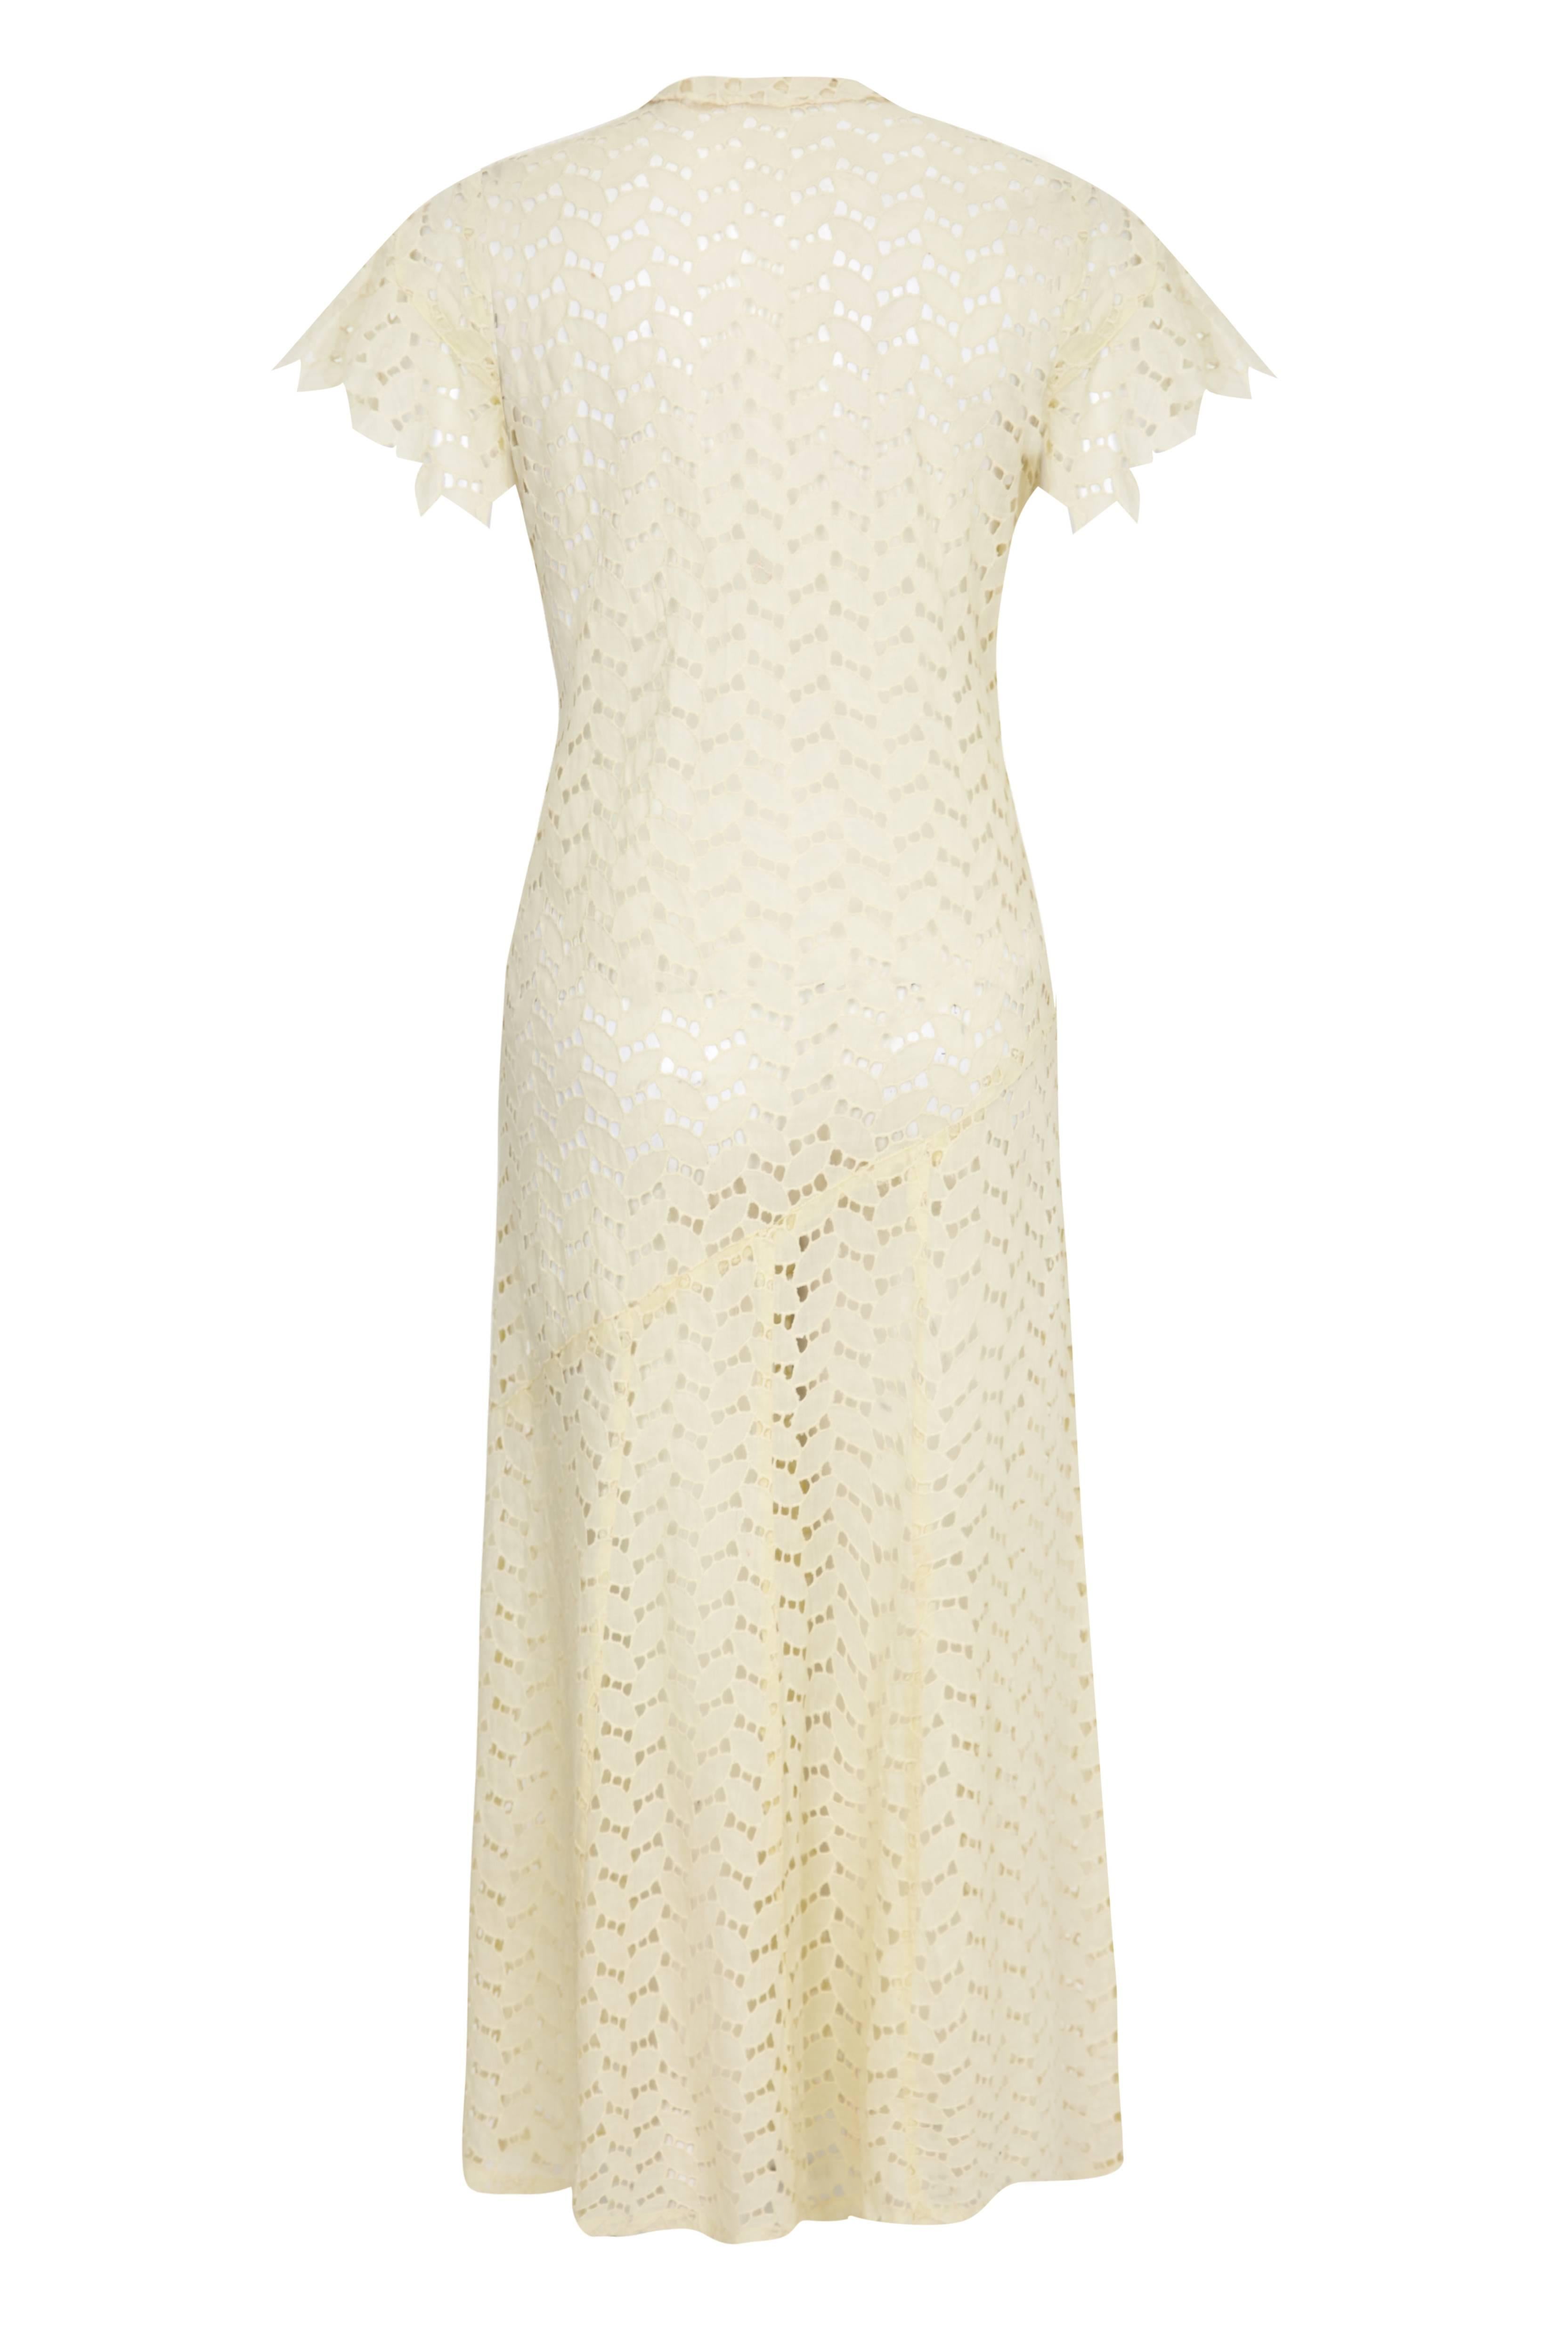 Lovely vintage 1920s buttermilk fine cotton dress with intricate cut work in leaf shapes. This dress is in the typical ‘flapper’ style with no waist shaping. It has an asymmetrical hip seam, panelled skirt and cross over front with lapels. It is in